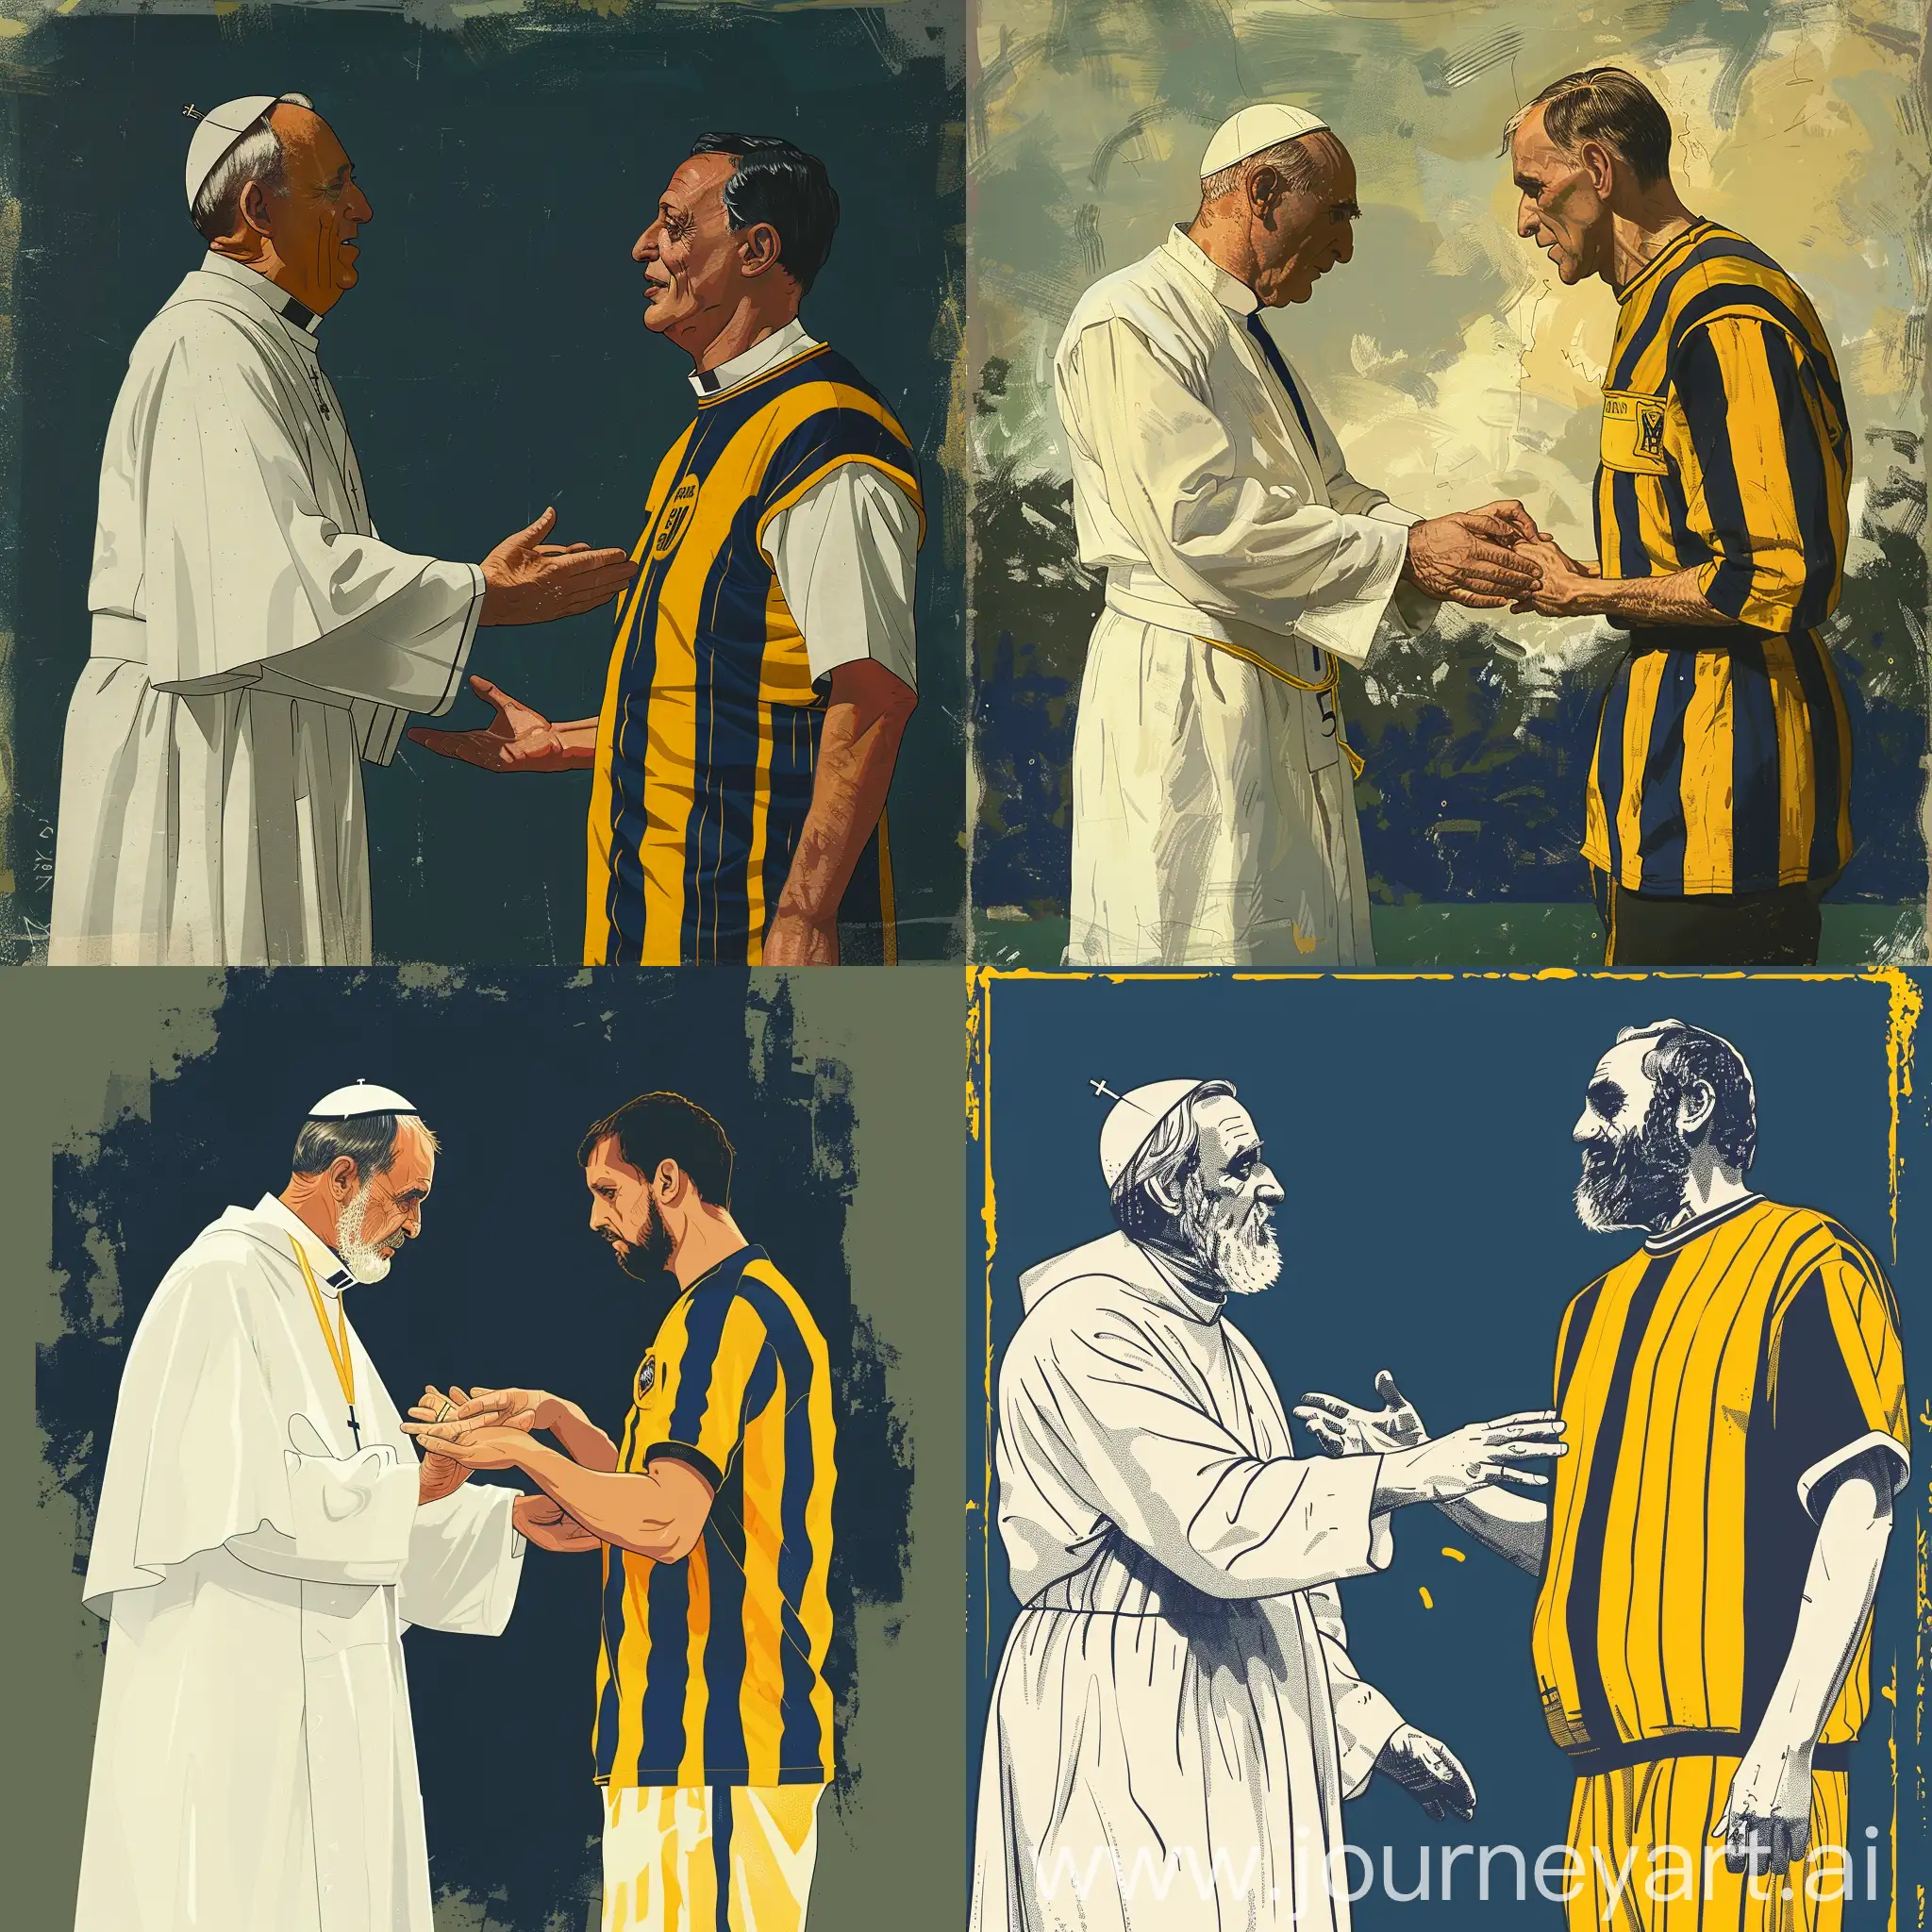 A clergyman in white clothes gives a Conspiracy to a man in a yellow and dark blue striped jersey, unit of measurement, illustration poster picture with yellow and dark blue theme